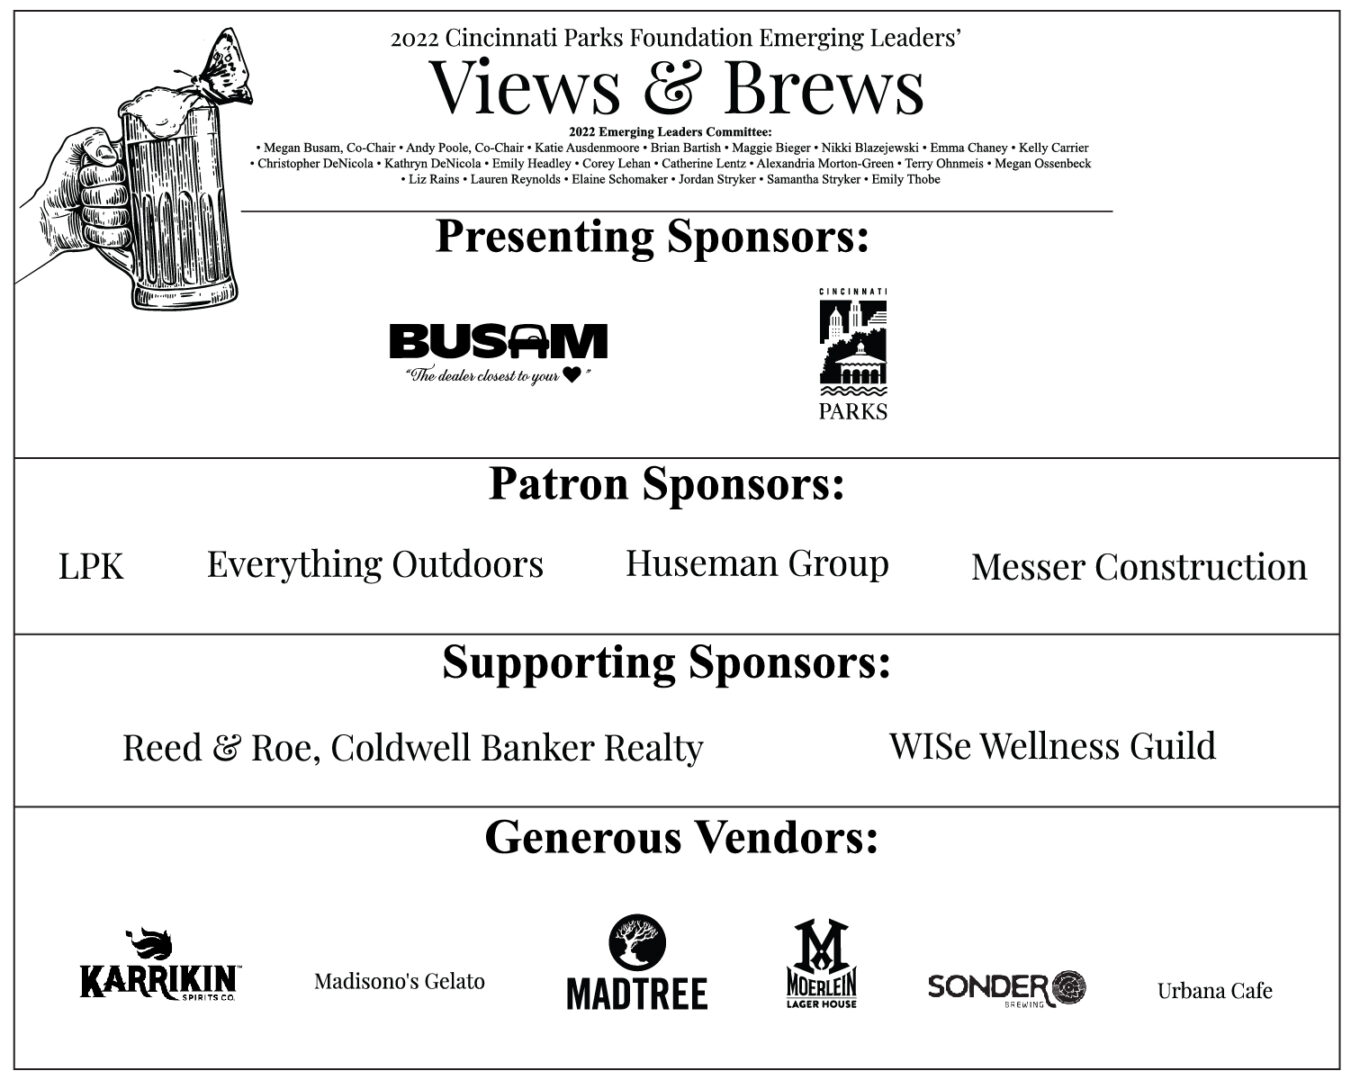 Sponsors for Views and Brews 2022